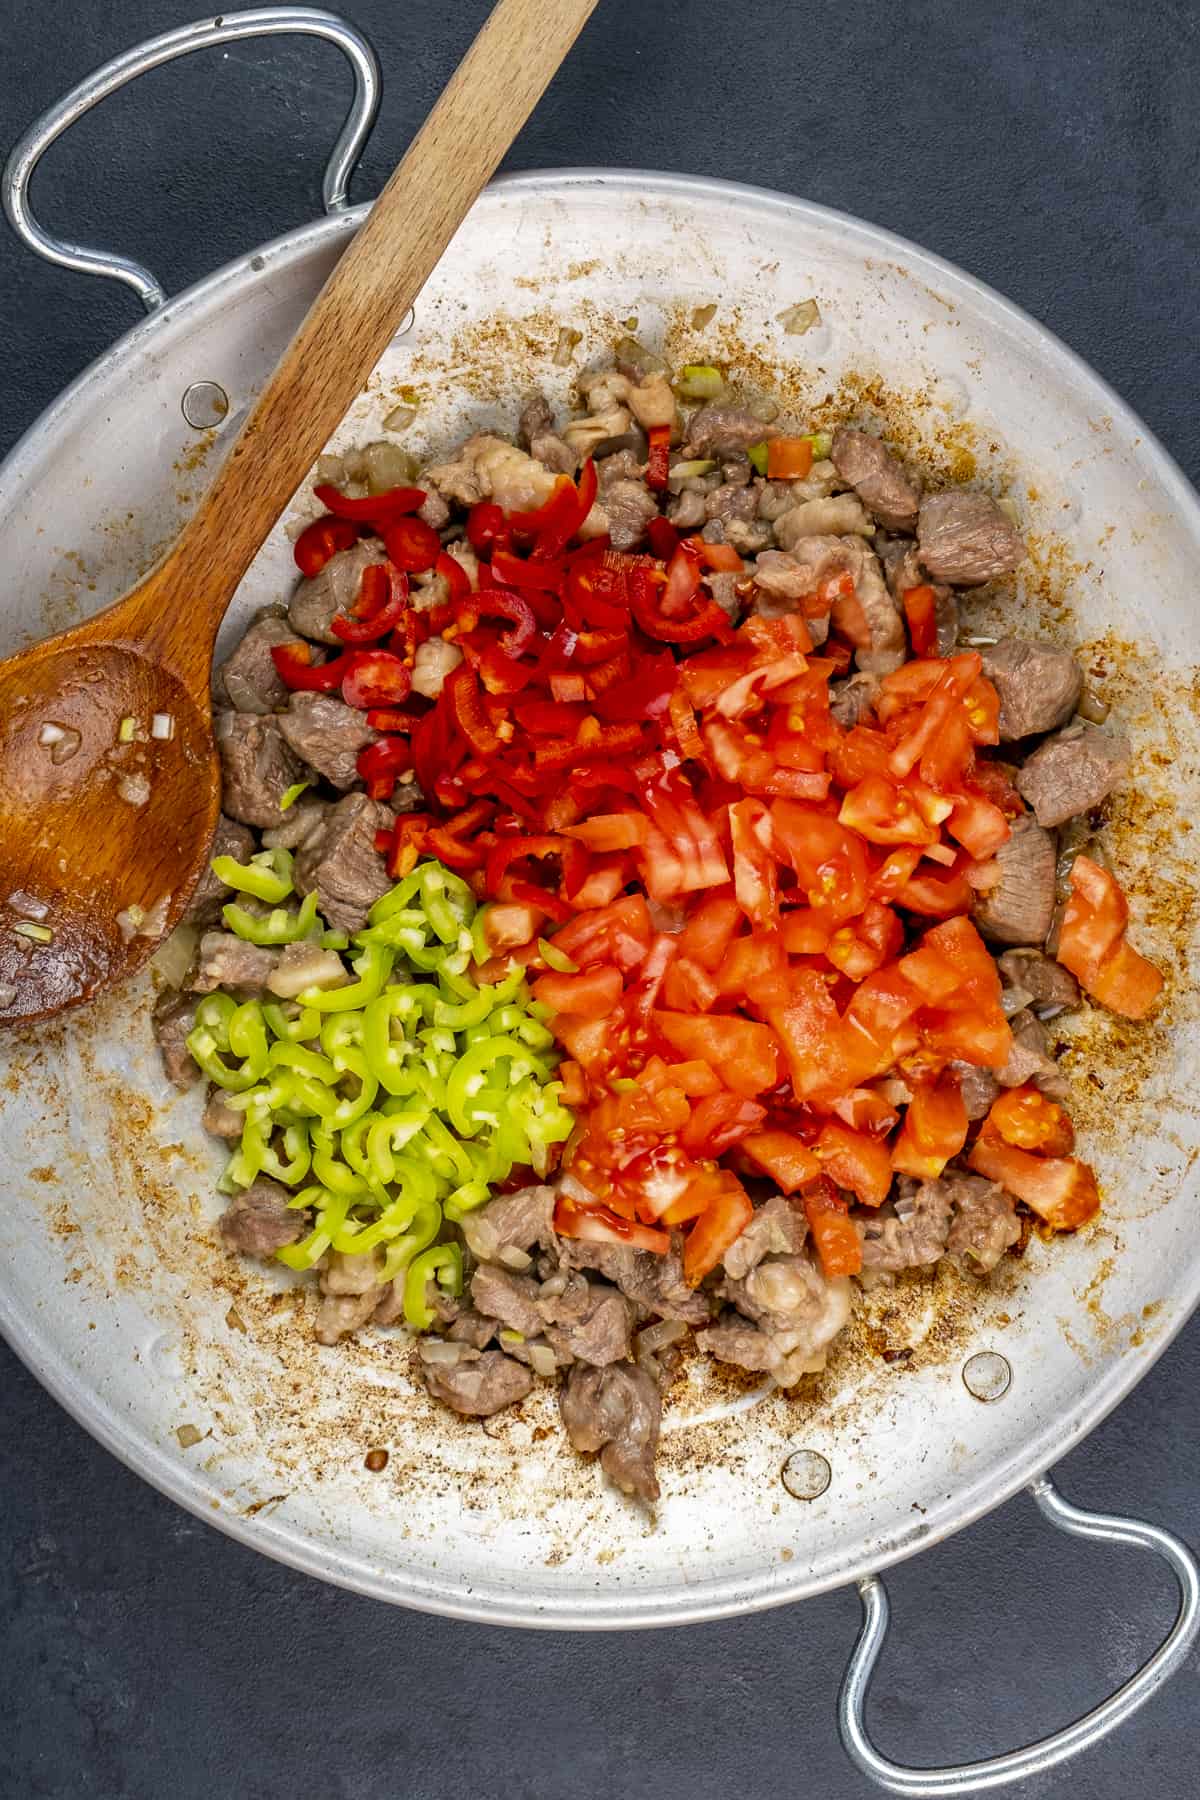 Chopped tomatoes and peppers thrown on cooked diced lamb in a traditional pan.